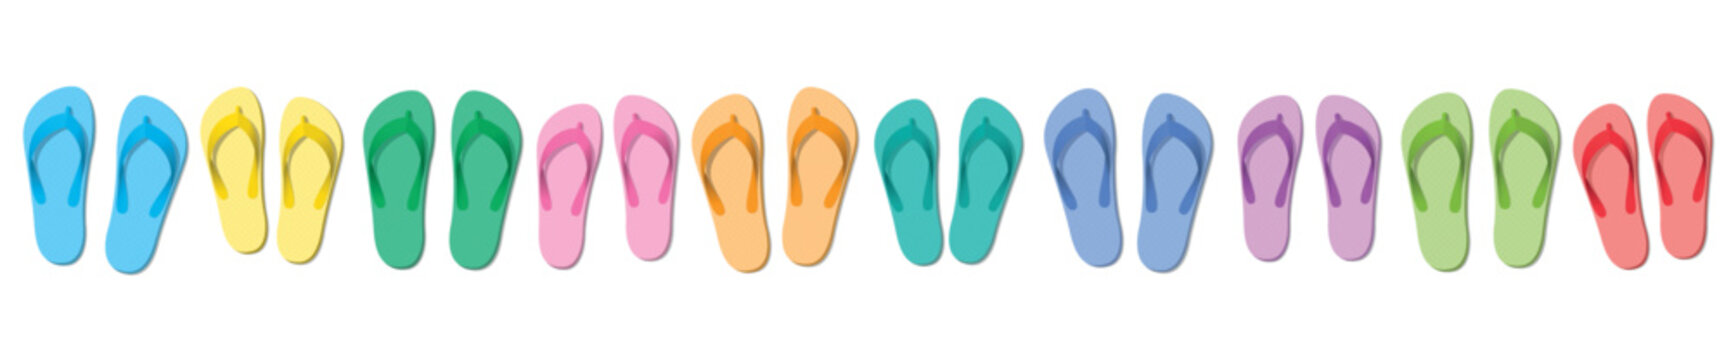 Colorful flip flops, ten colored pairs of rubber sandals, symbolic for group travel, teamwork, funny friends or happy family holiday - isolated vector illustration on white.
